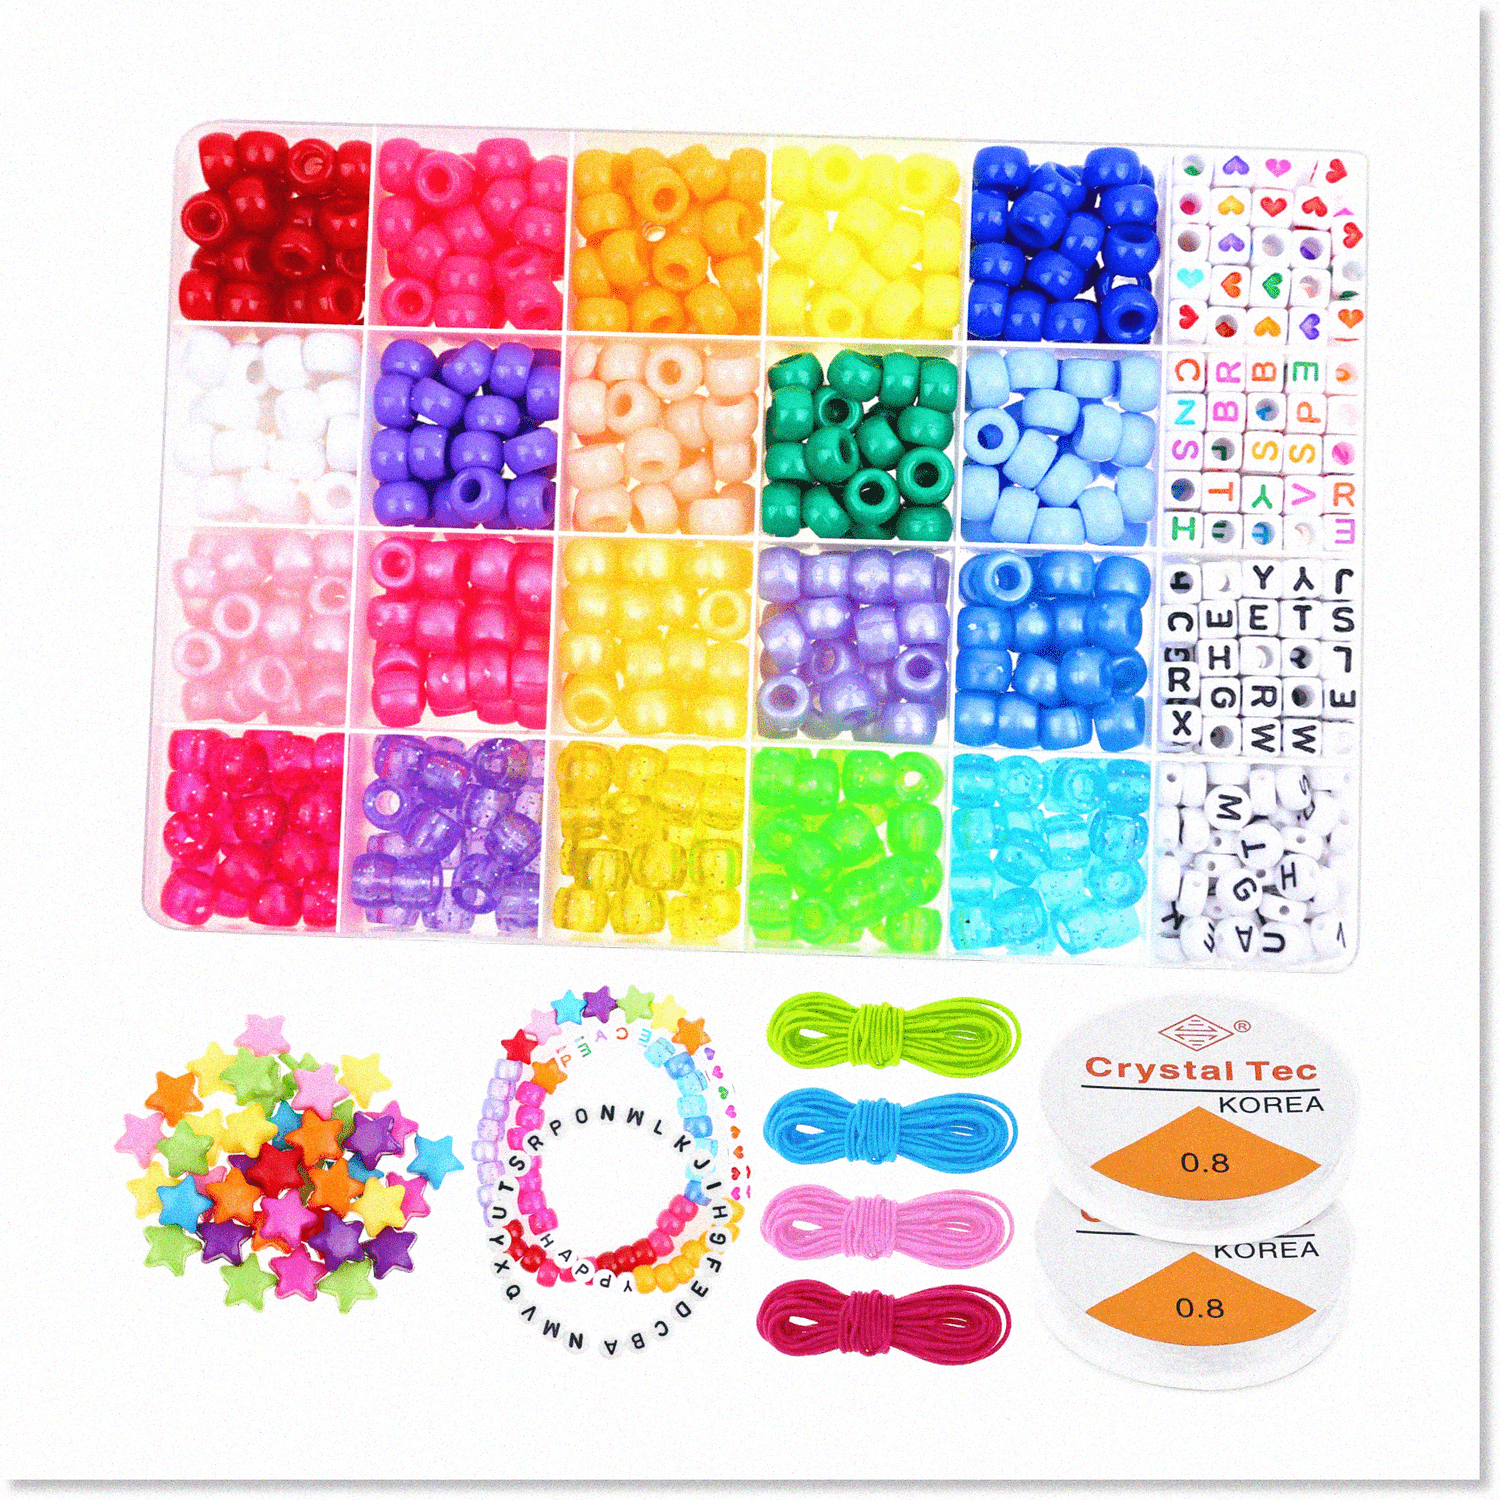 1000 Pcs Gl Pony Seed Beads Kit - Create Beautiful Bracelets with 20 Colors, Acrylic Round Cube Letter Beads, Heart Beads, Star Beads